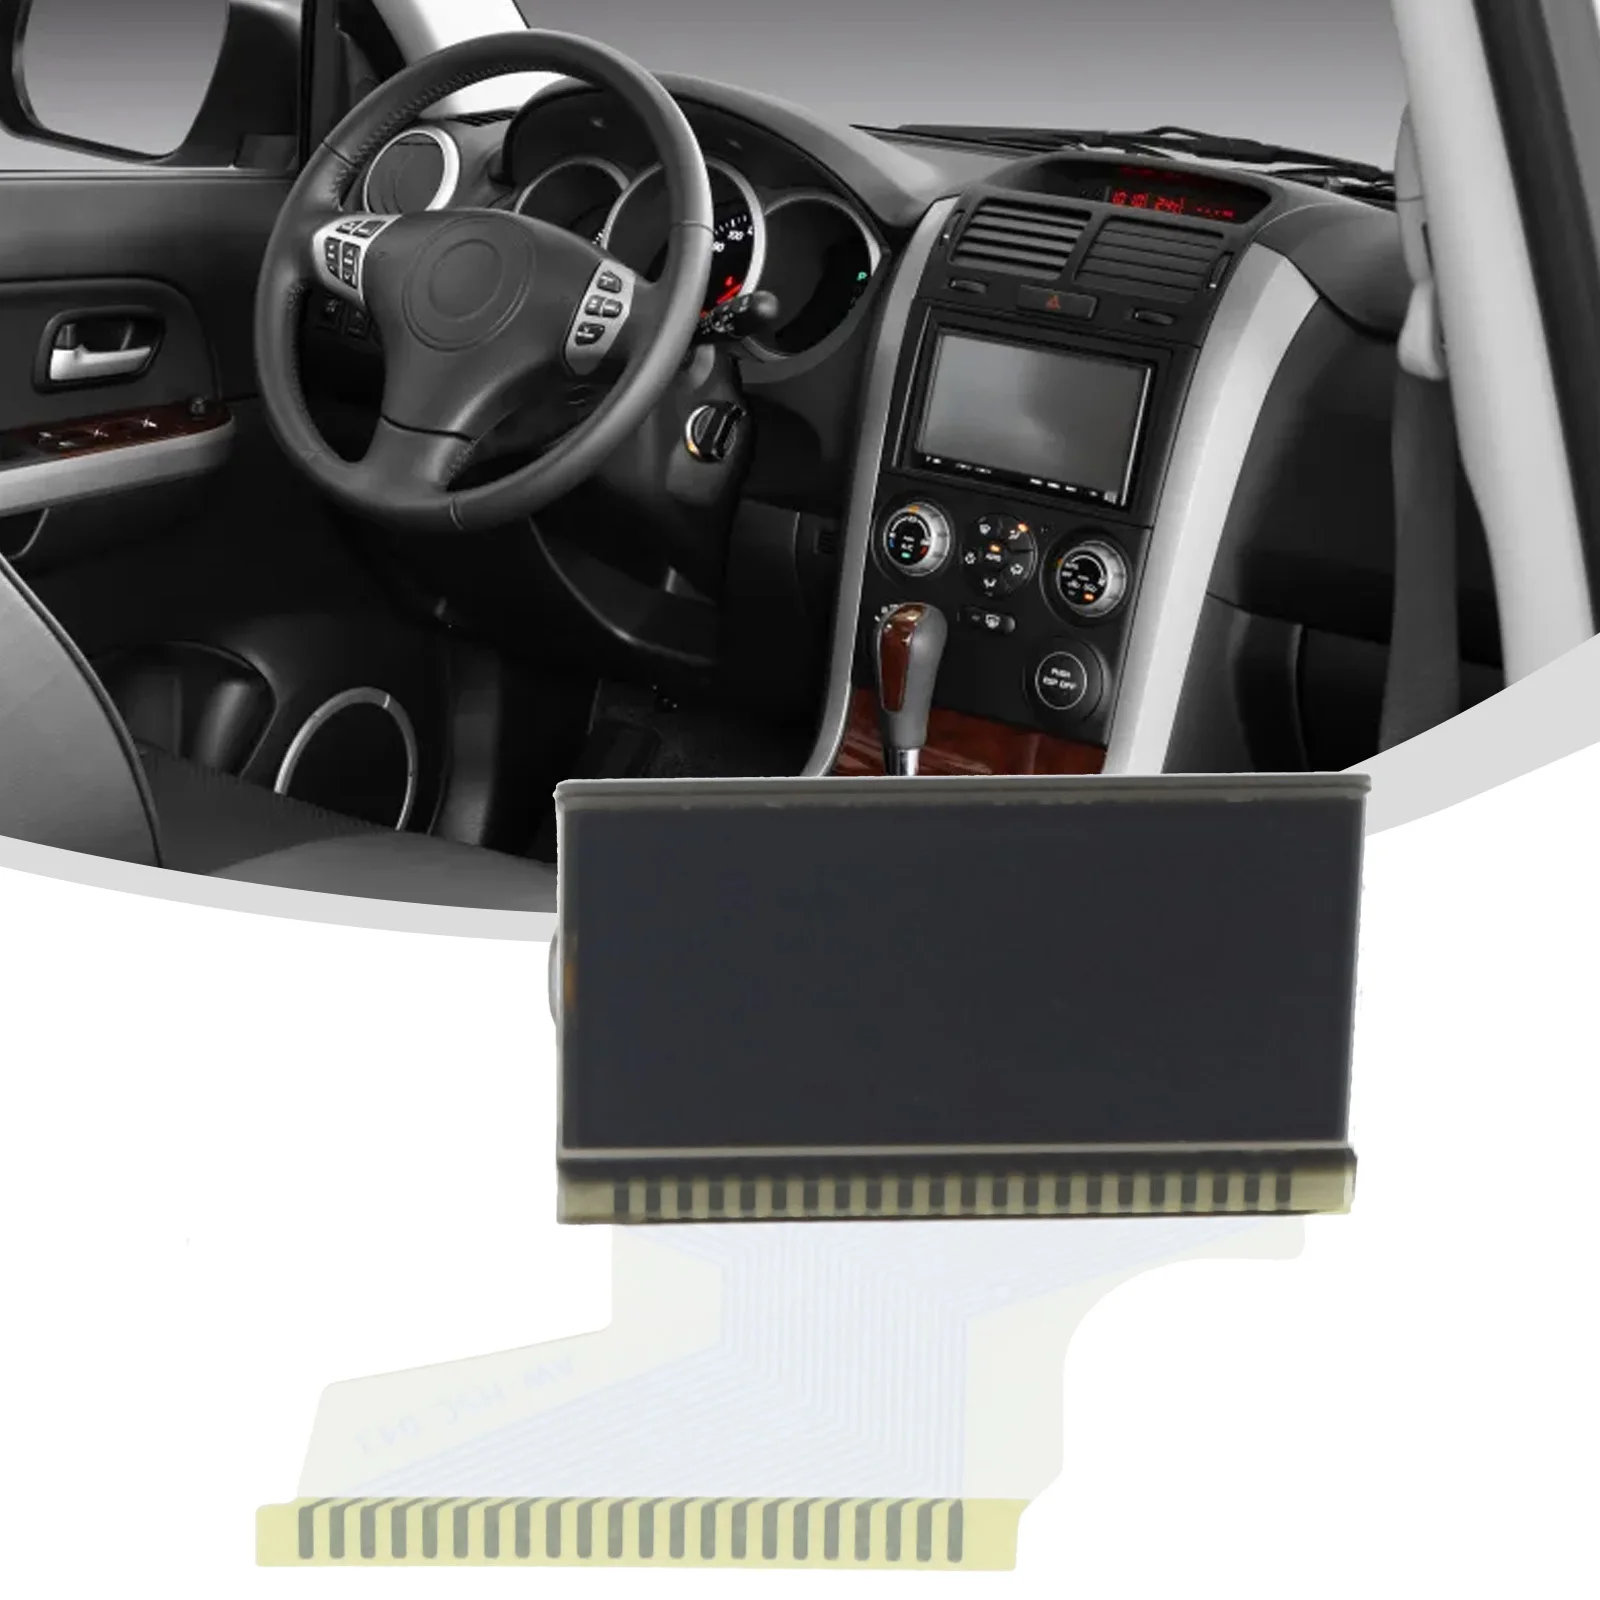 

LCD Display Upgraded LCD Dashboard Replacement for Opel Combo/Corsa/Meriva/Tigra Direct Plug and Play Installation